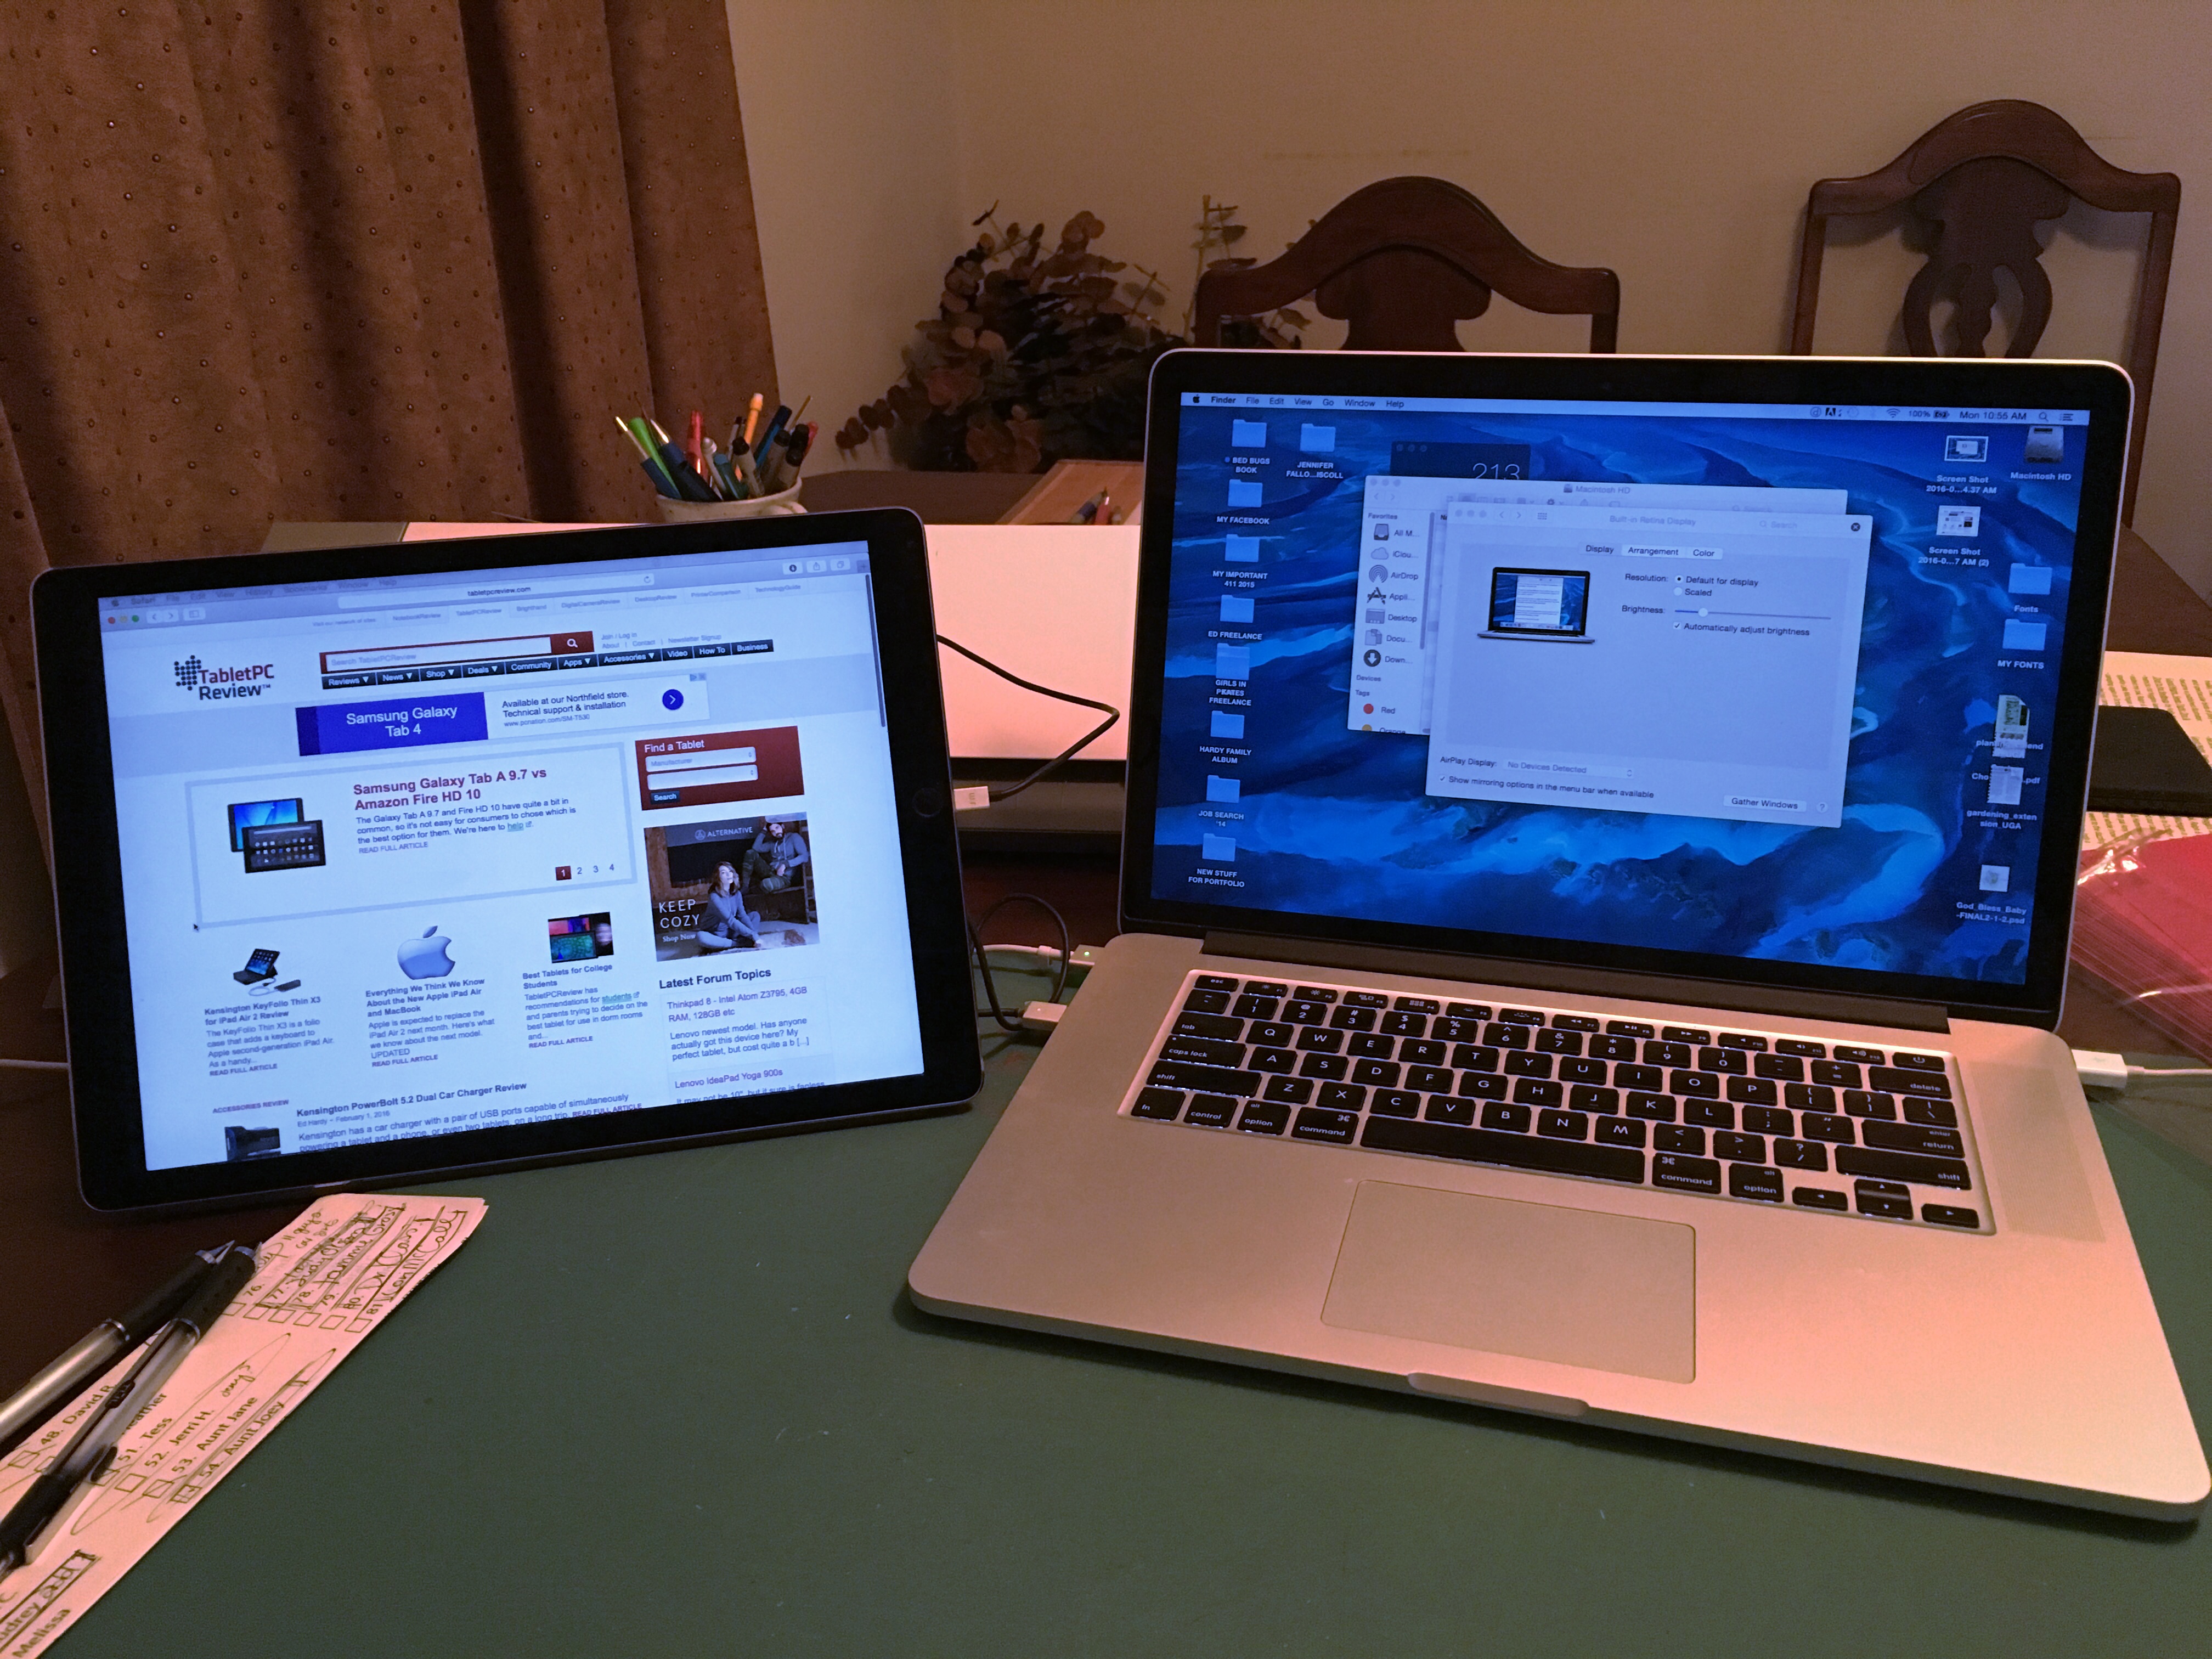 can you use a windows 10 laptop as monitor for mac mini